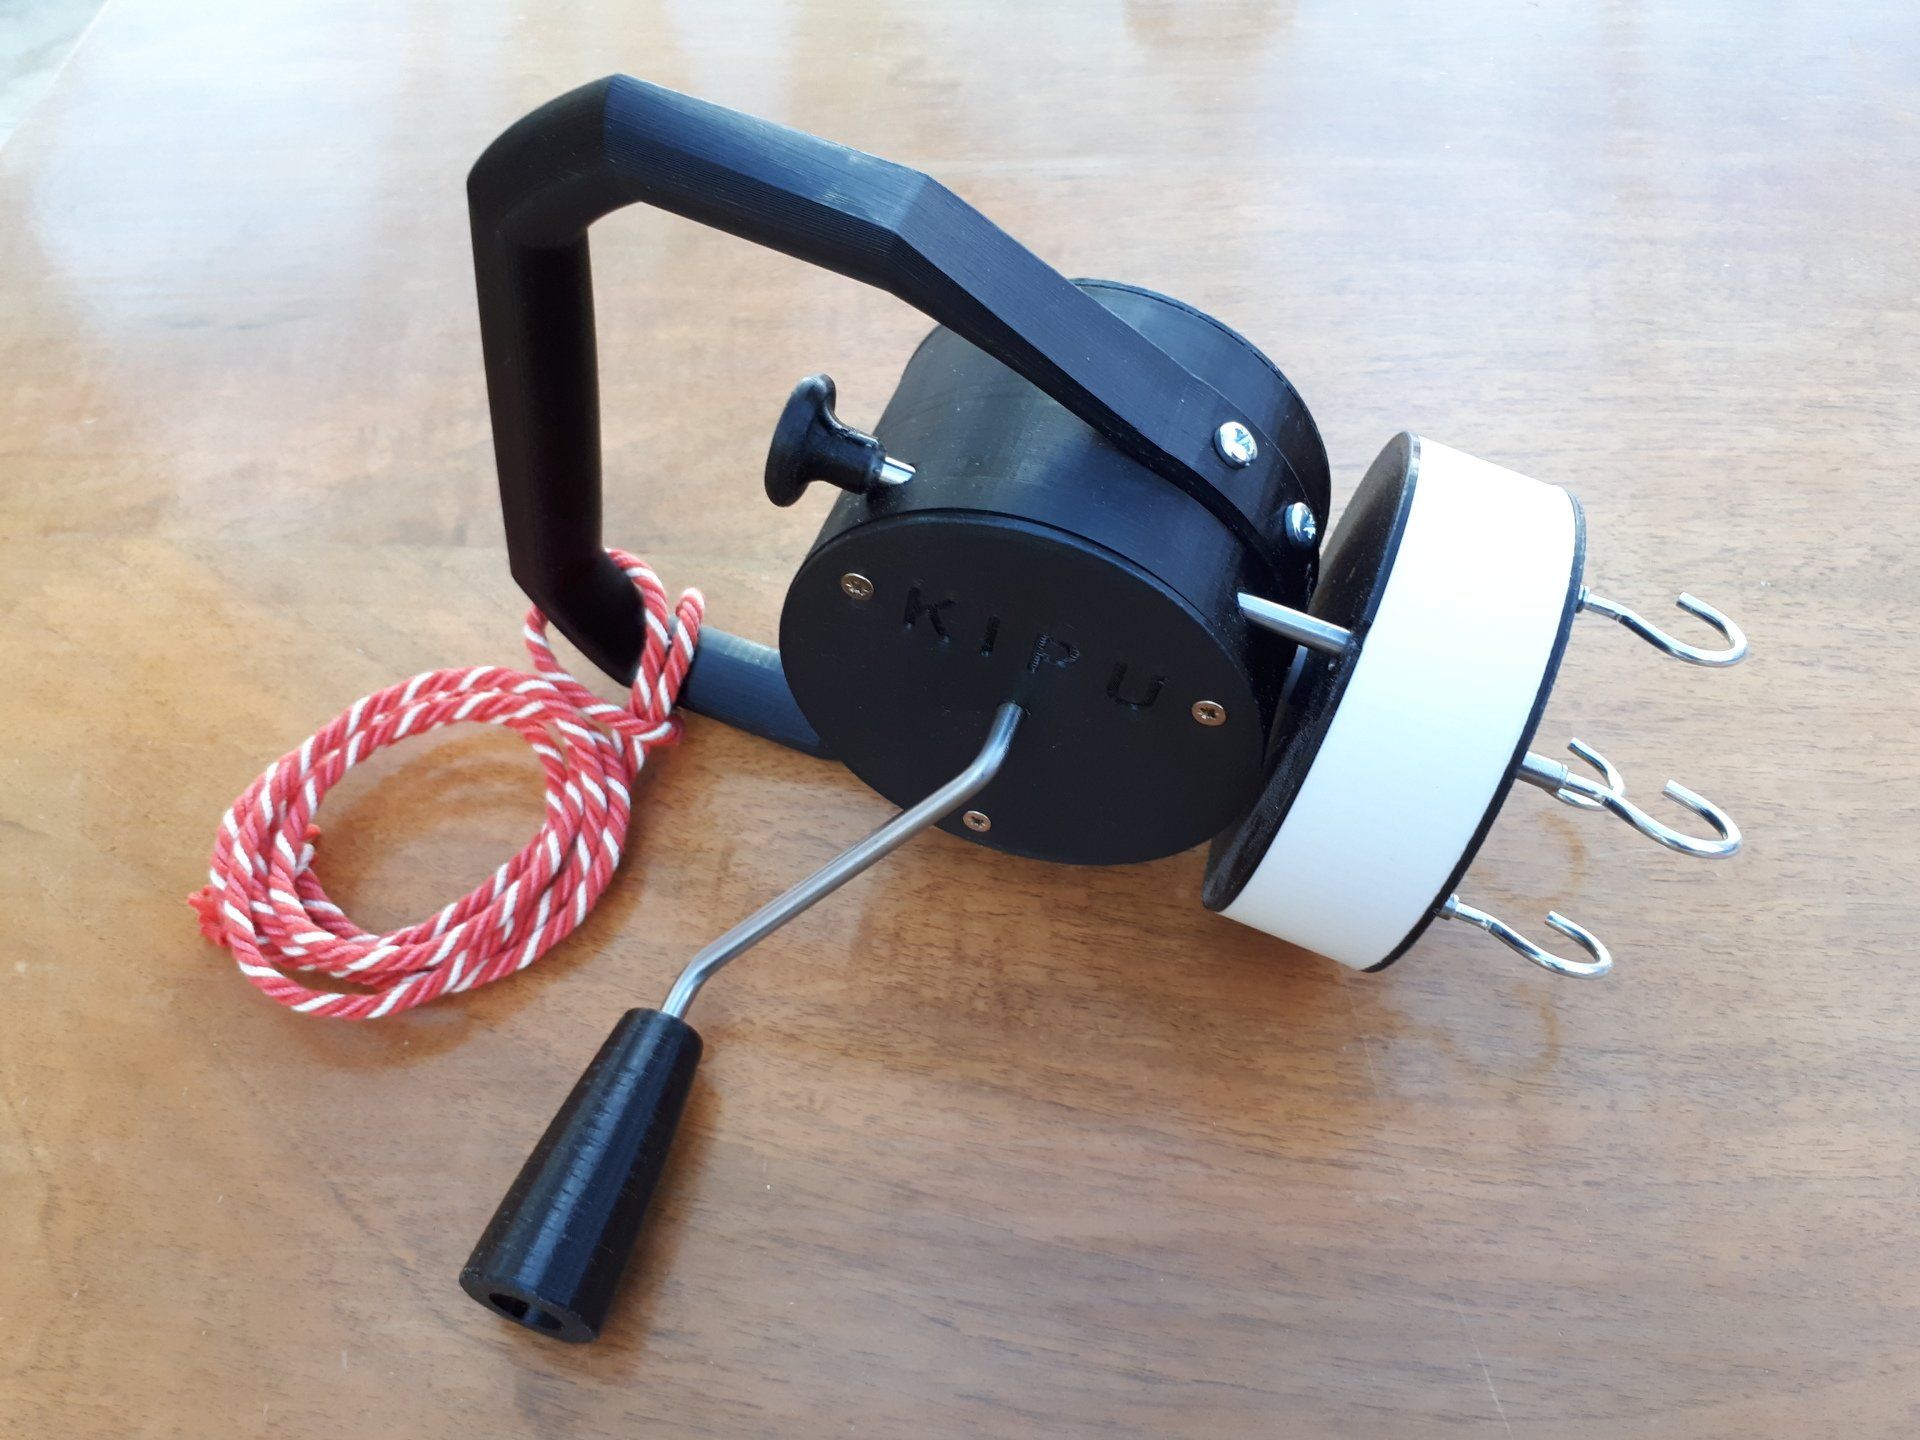 Kipu Cord Winder with safety cord